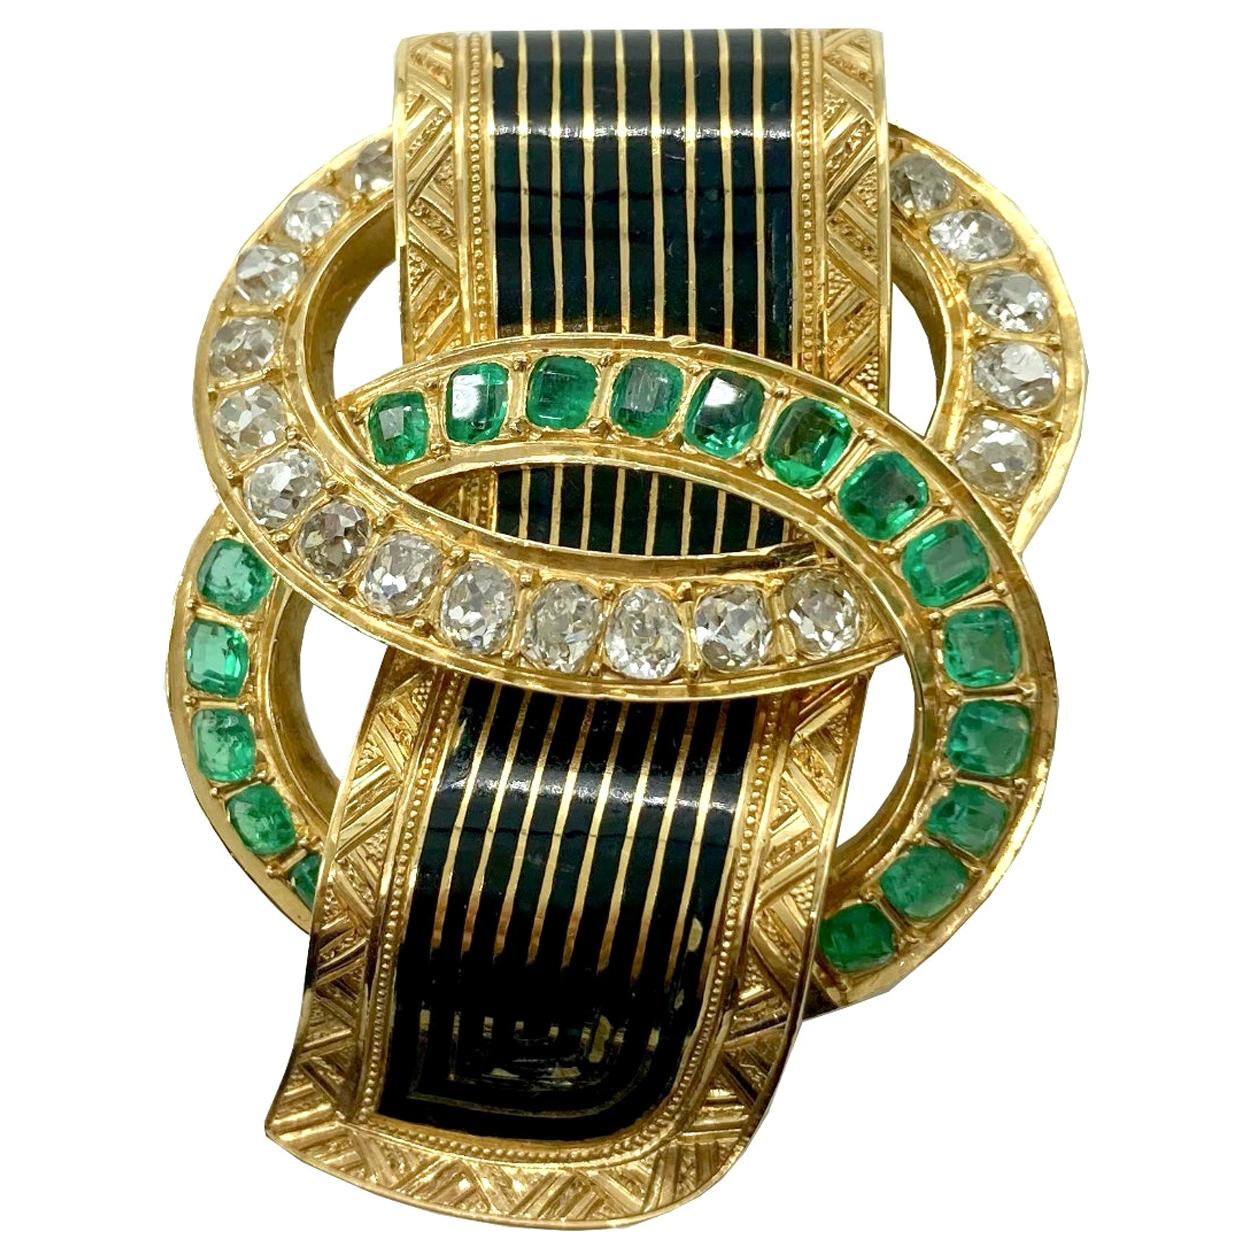 Antique Taille d’Epargne Emerald and Diamond Buckle Brooch-Pendant